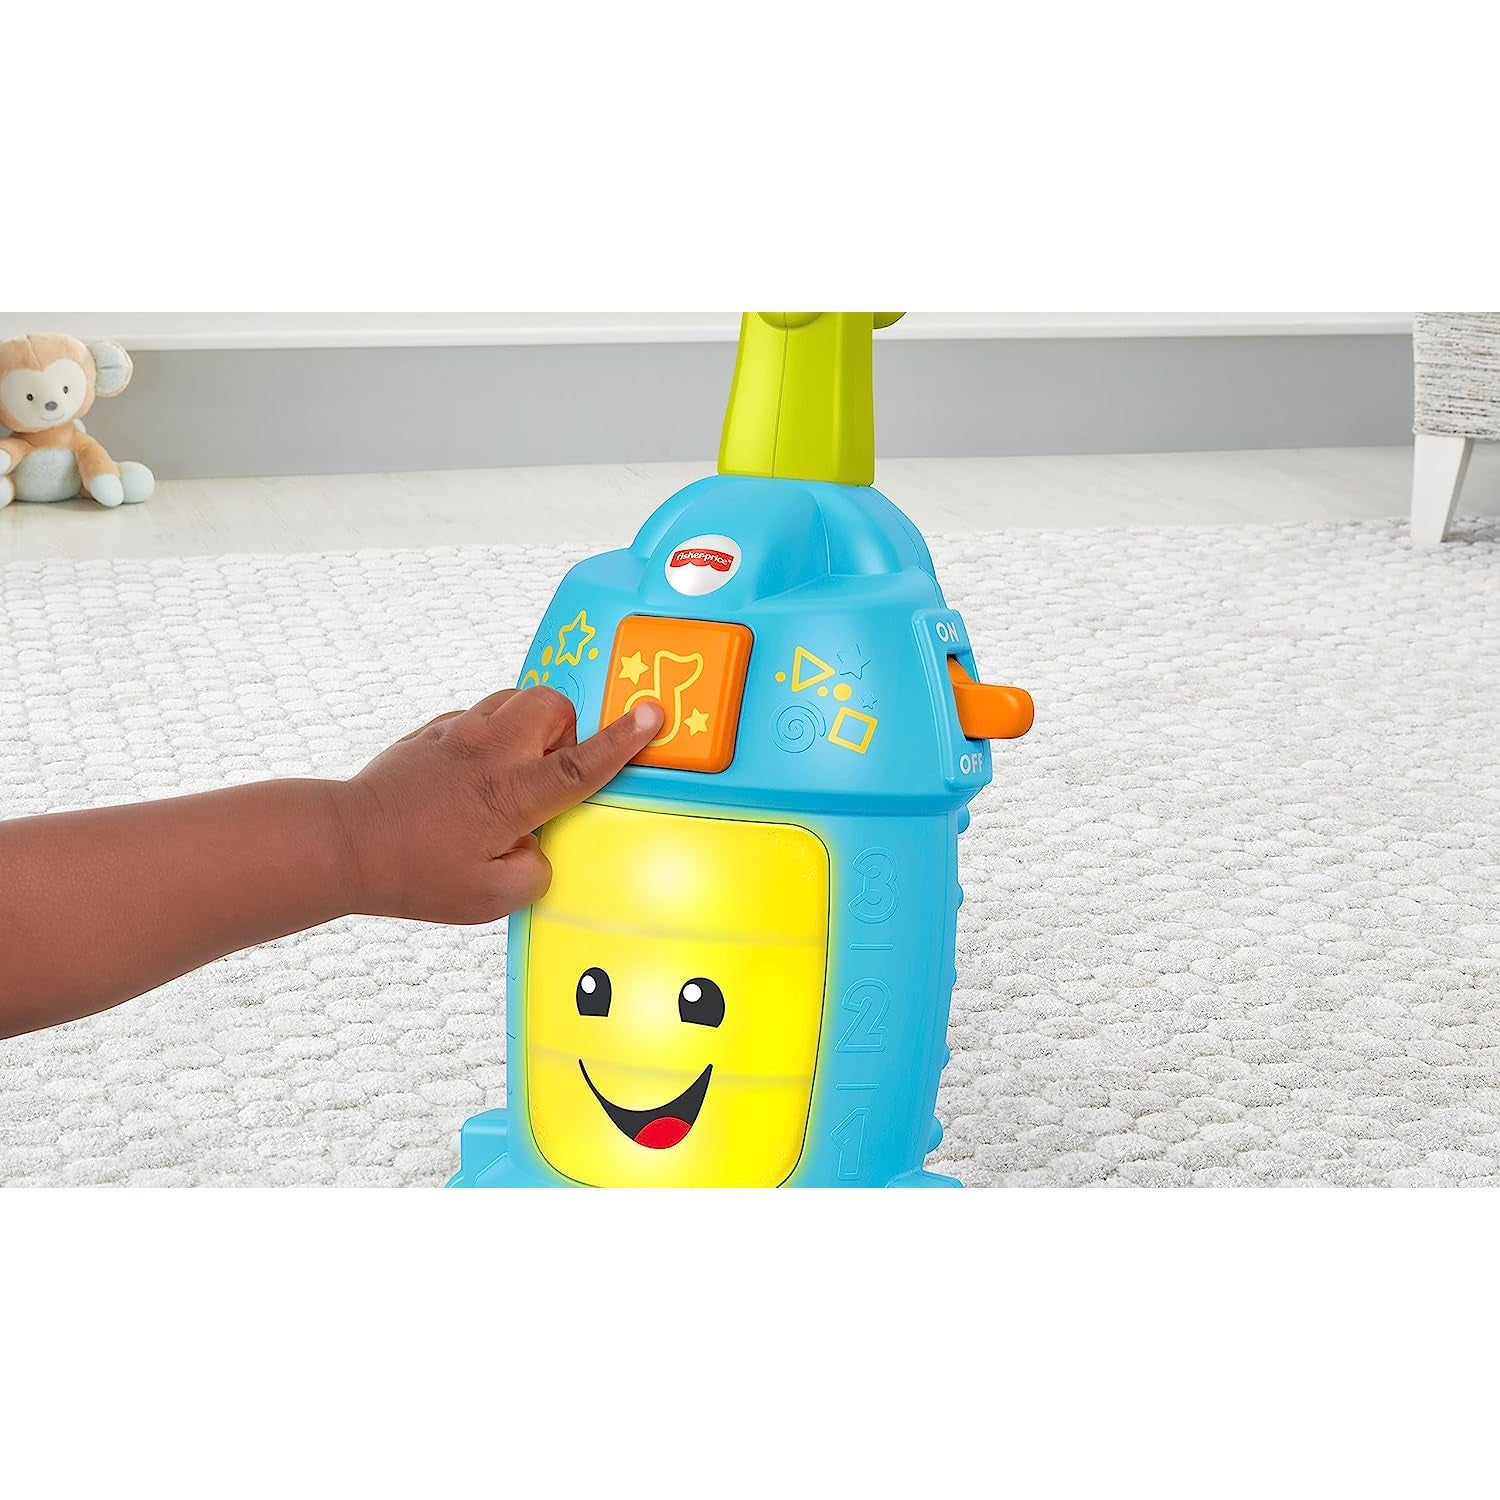 Fisher-Price Laugh & Learn Toddler Toy Light-Up Learning Vacuum Musical Push Along